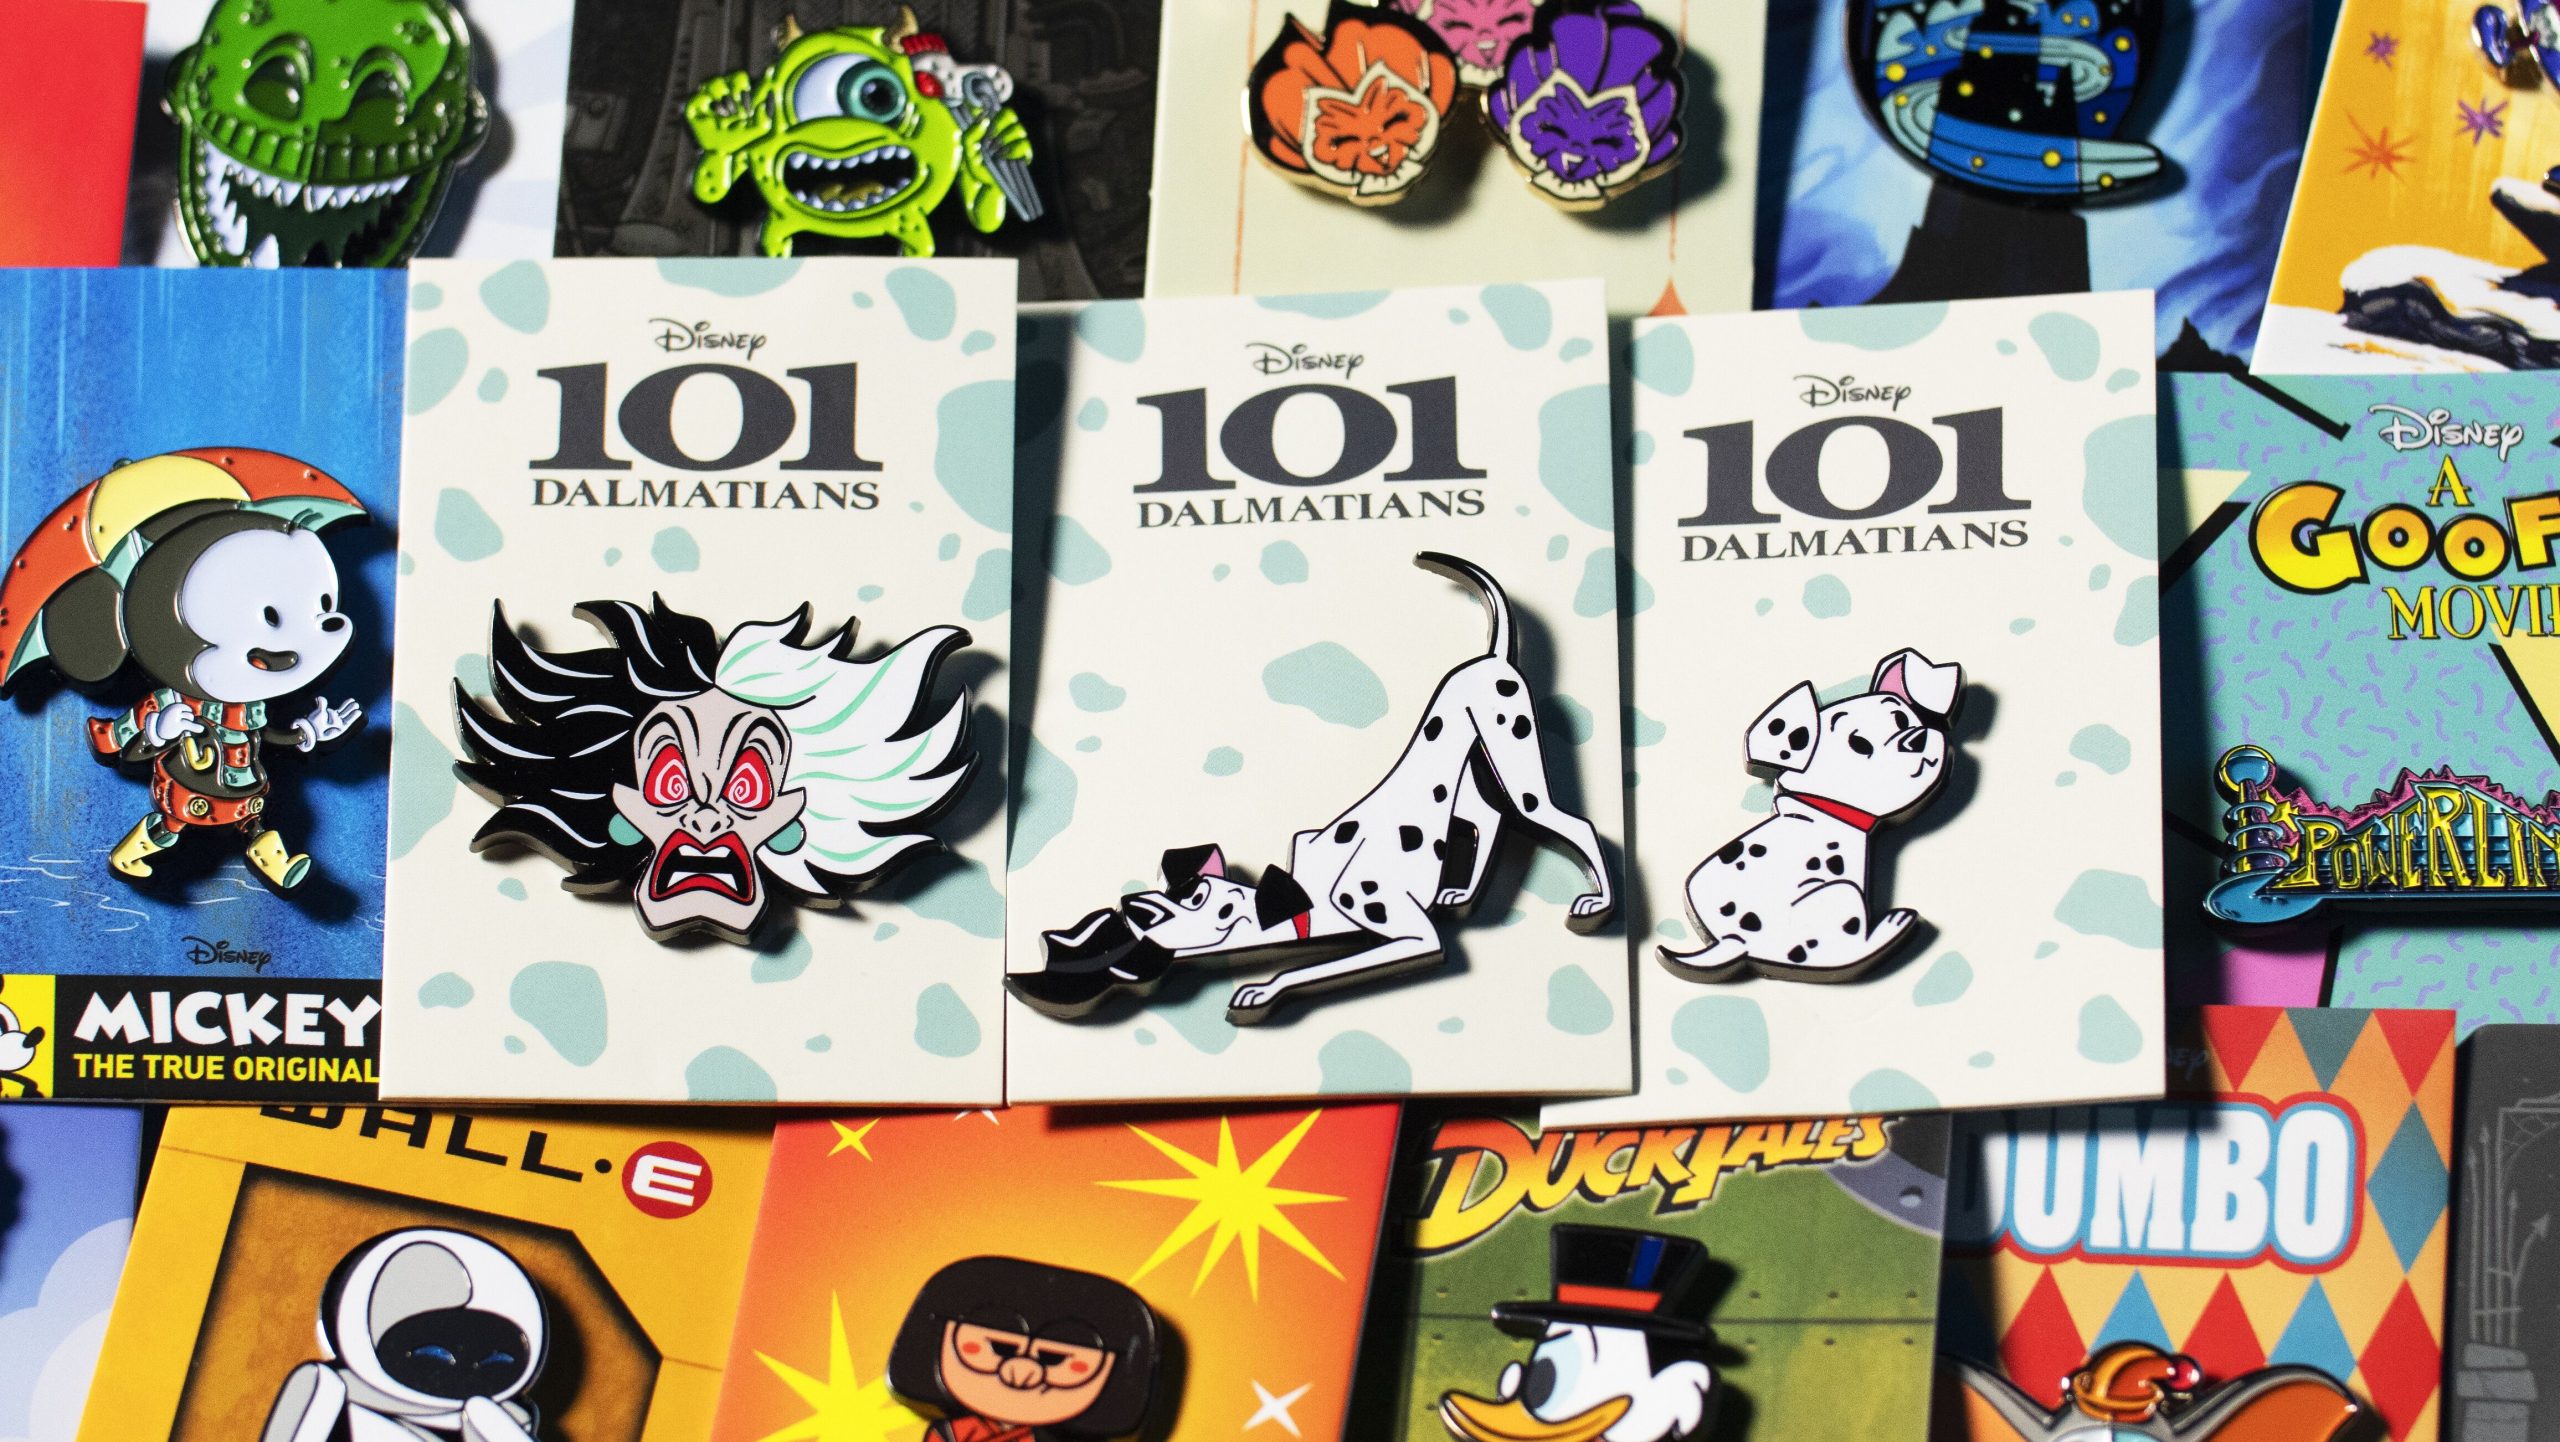 Adorable 101 Dalmatians Pins From Mondo Now Available